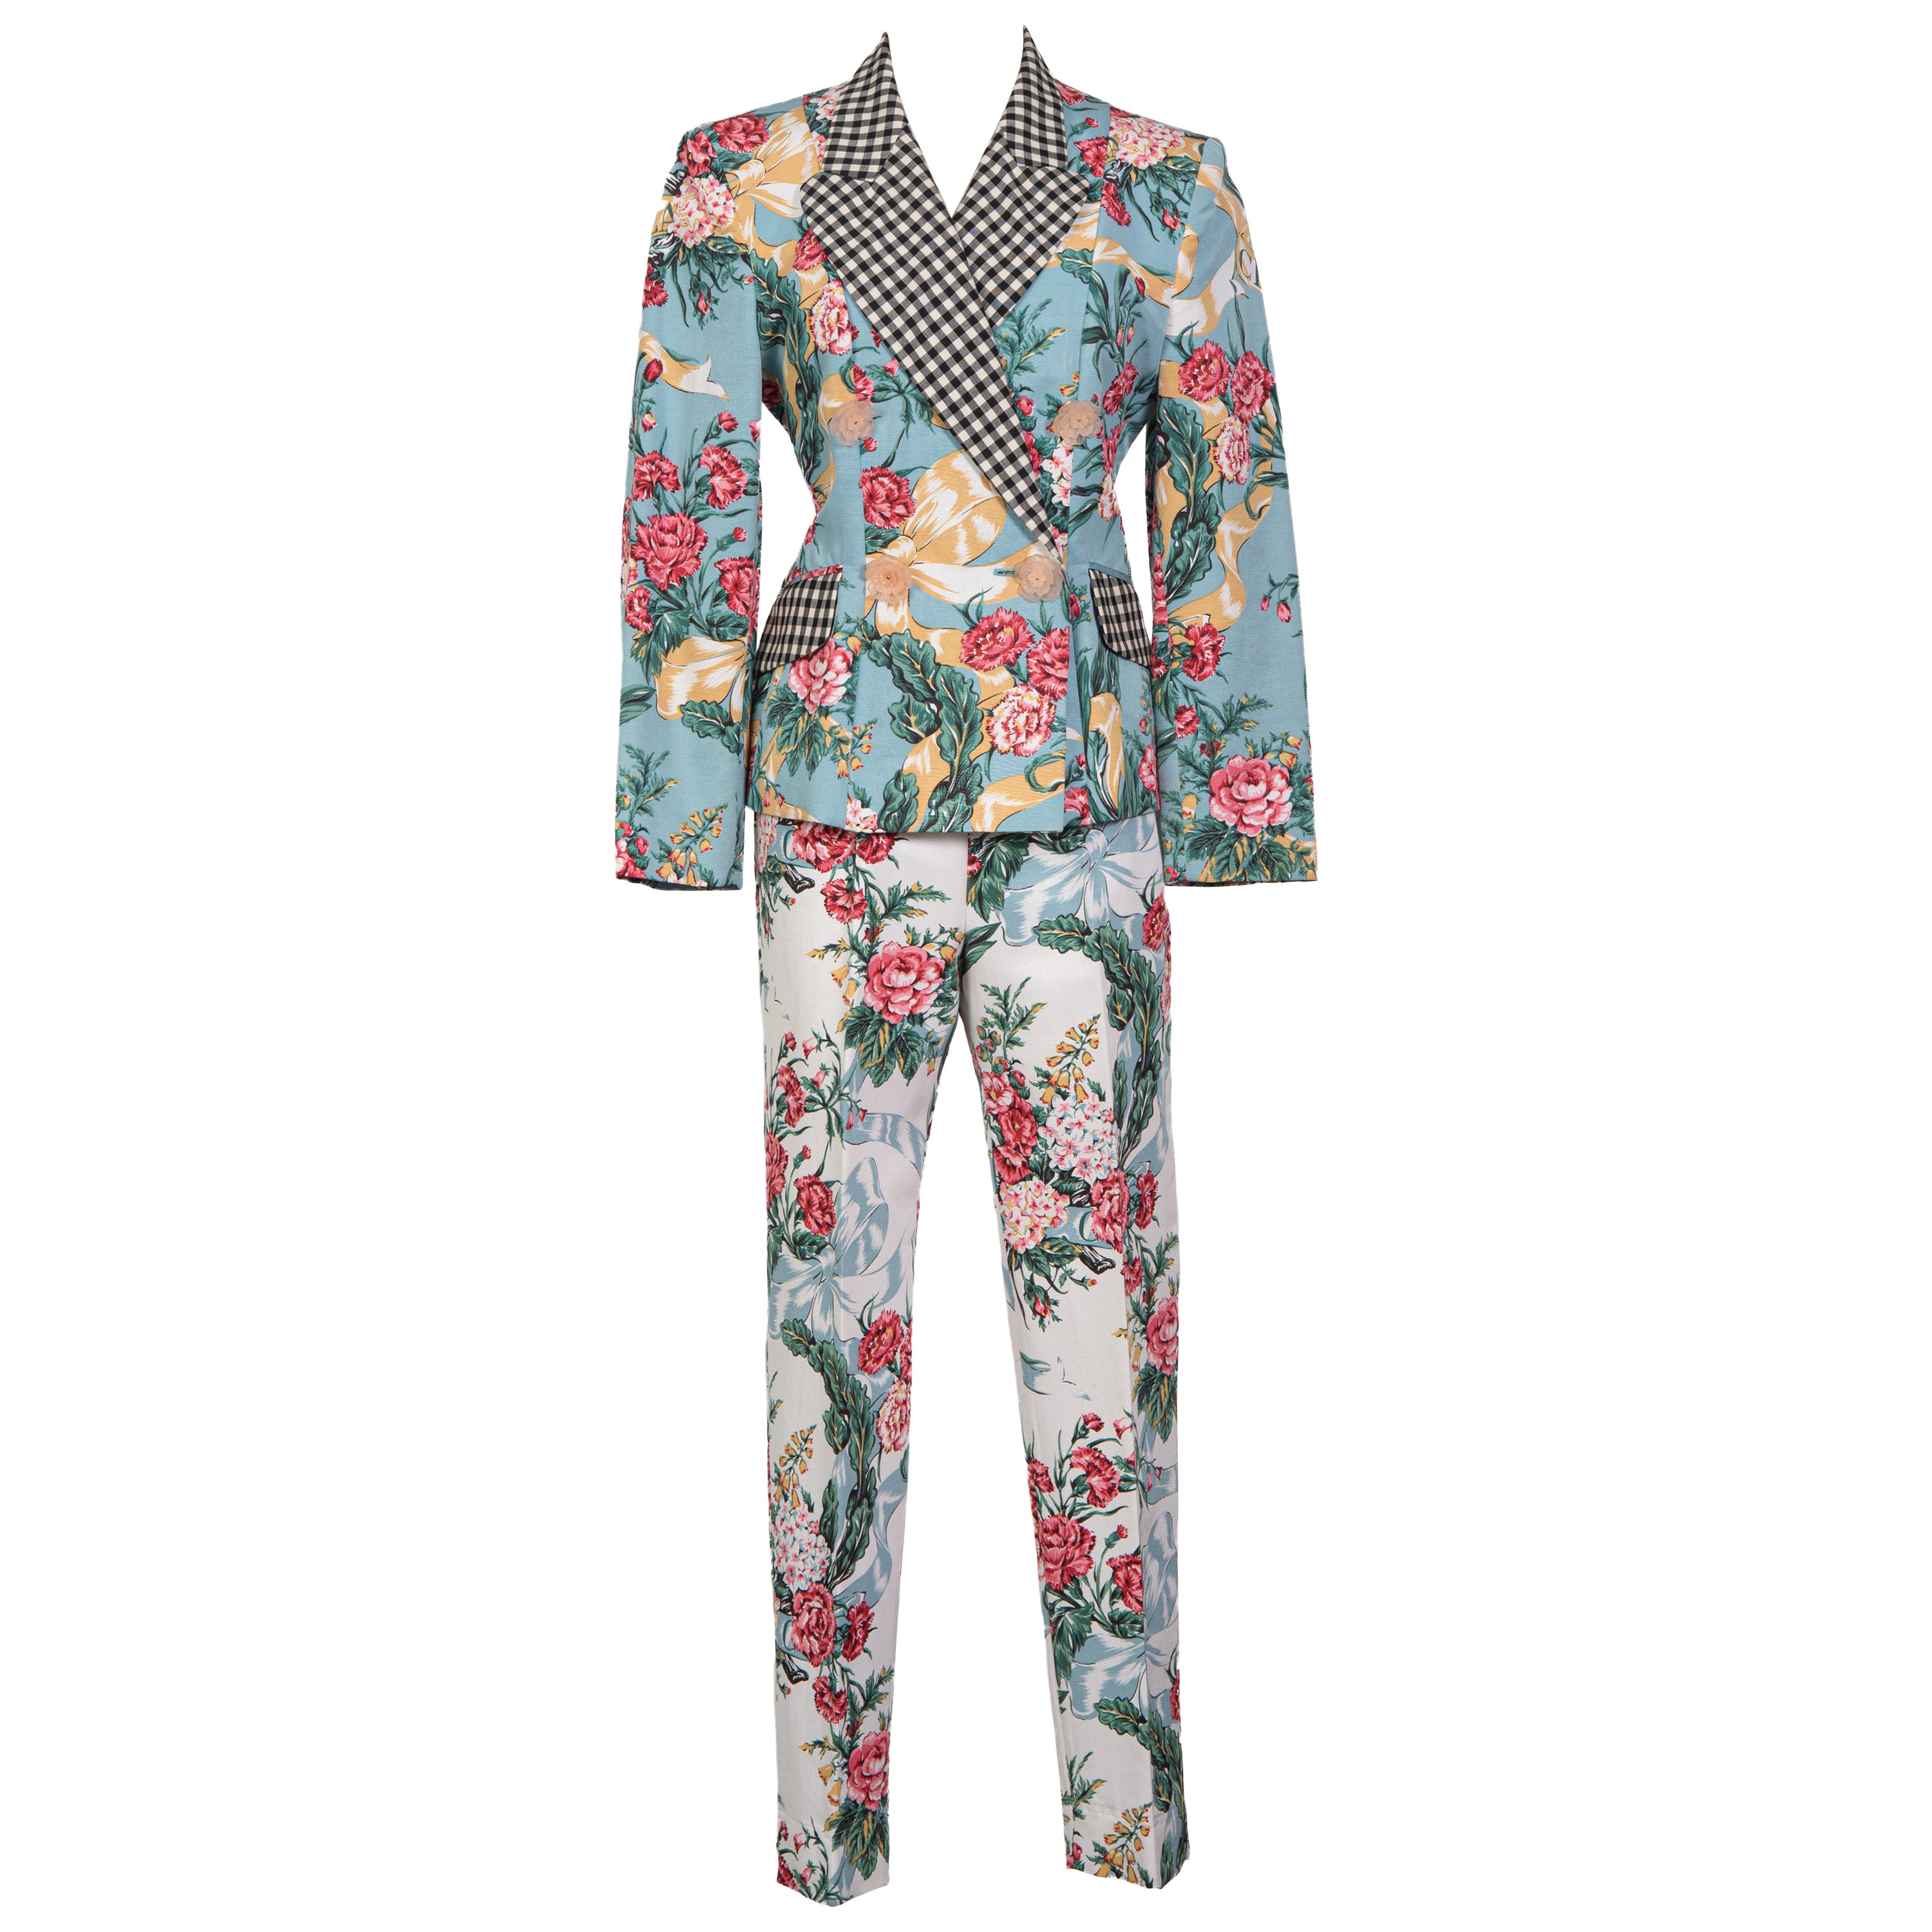 Early 1990s MOSCHINO Blue White Pink Floral & Check Print Jacket & Pant Suit For Sale